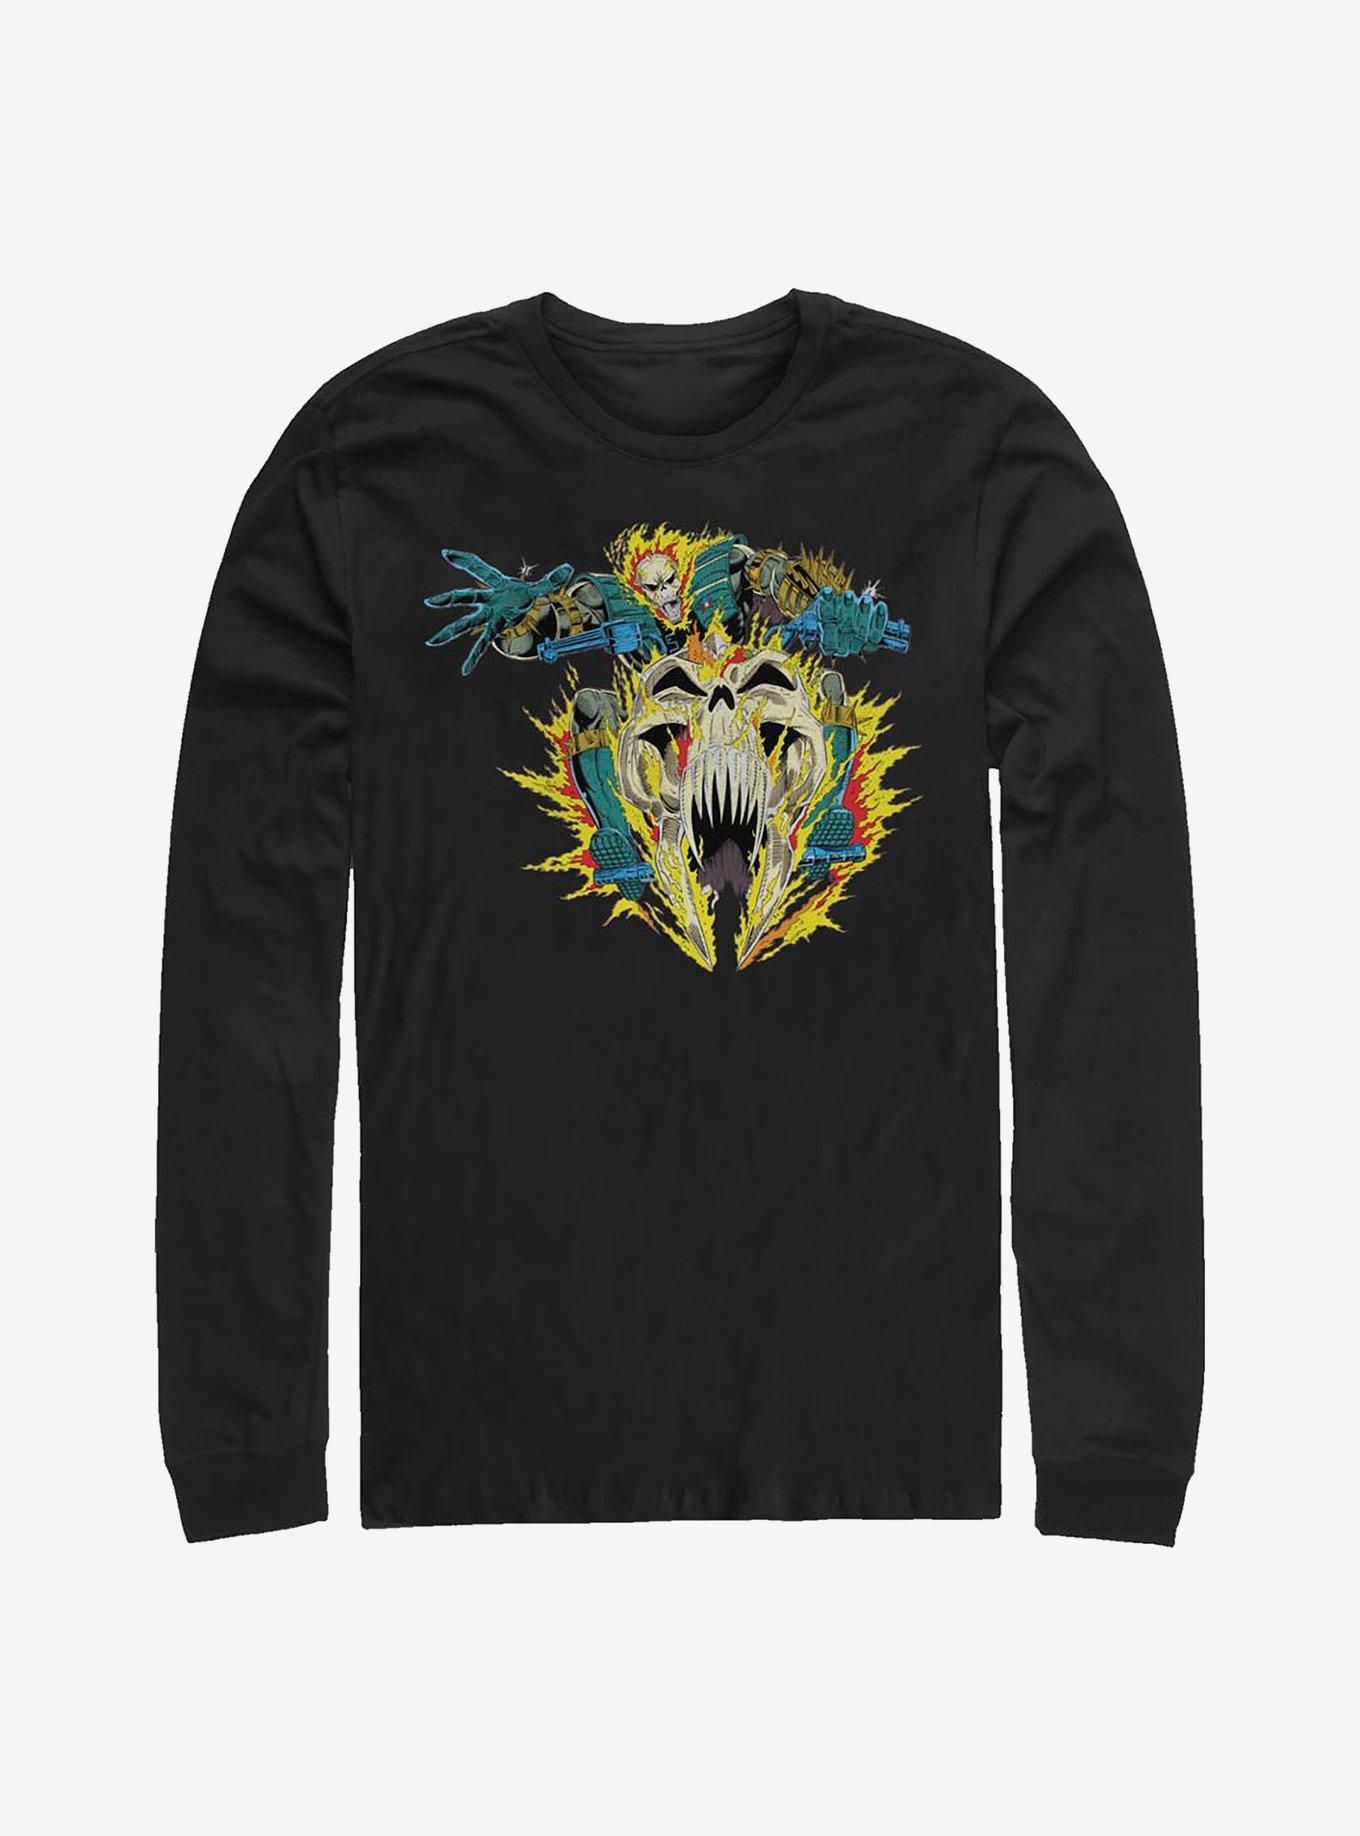 Marvel Ghost Rider Flames Long-Sleeve T-Shirt